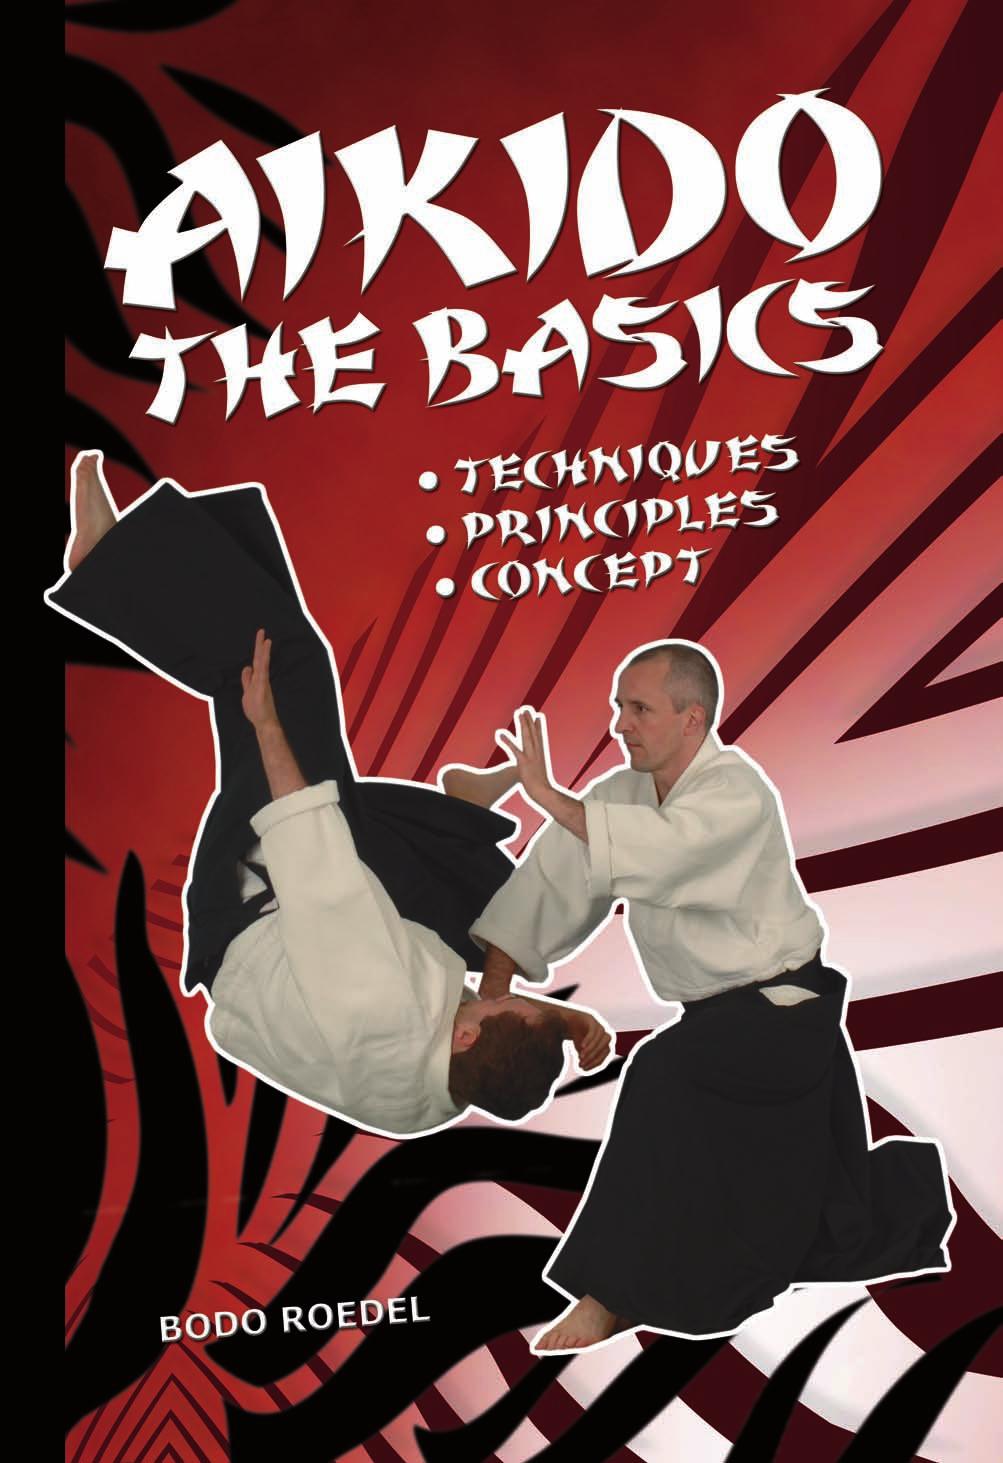 Both the theoretical background and the method of learning Aikido are clearly explained.